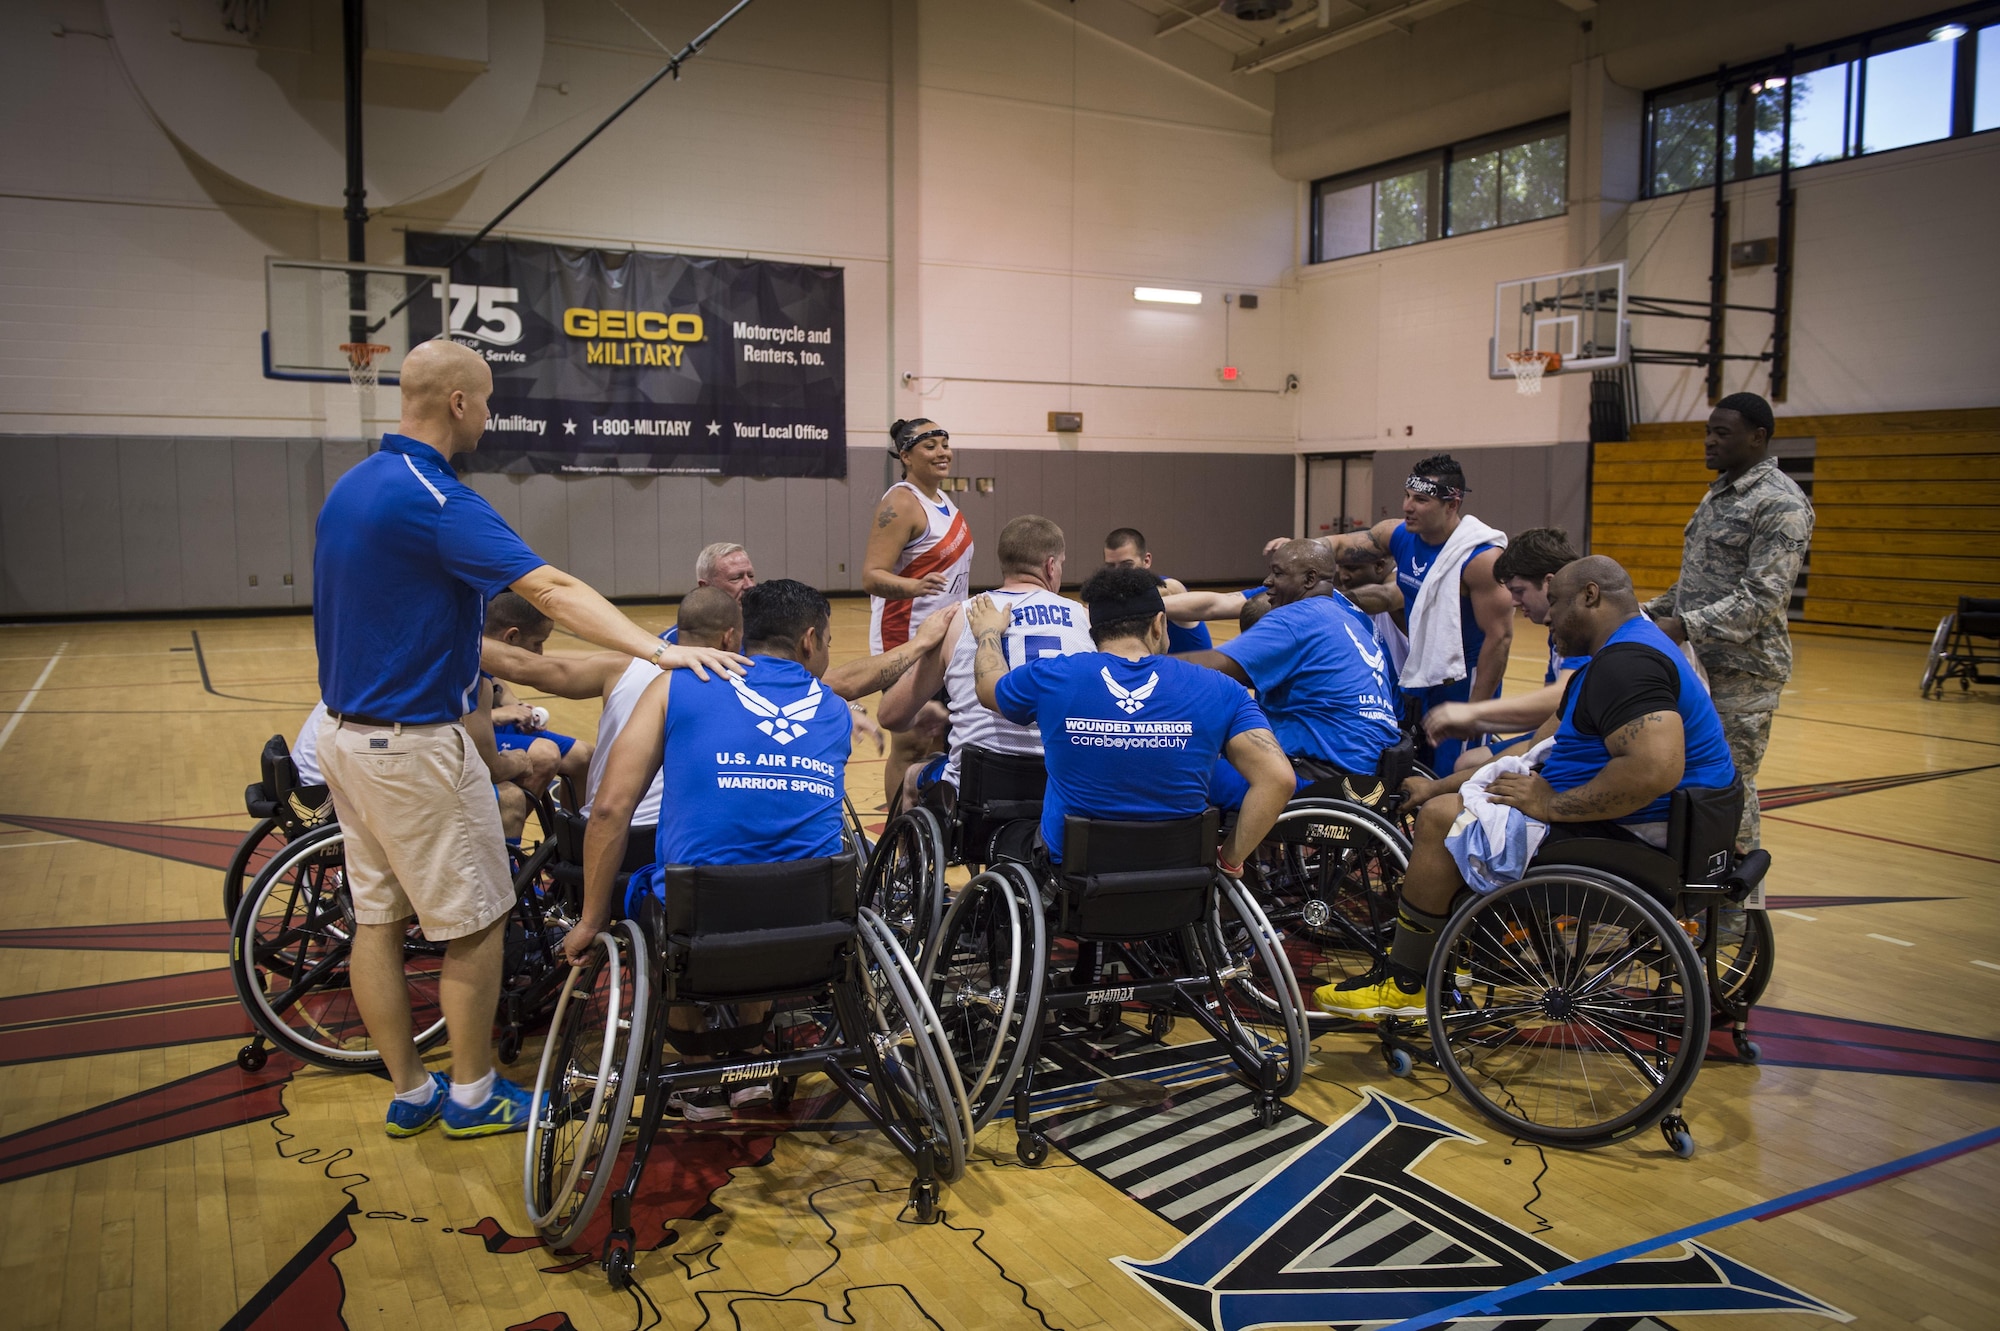 Maj. (Dr.) Sean Martin the chief of sports medicine with Air Force Special Operations Command Office of the Surgeon General, joins in the huddle with wounded-warrior athletes after wheelchair basketball practice at Hurlburt Field, Fla., April 5, 2016. The Warrior Games consist of seven sports including archery, cycling, shooting, sitting-volleyball, swimming, track and field, and wheelchair basketball. (U.S. Air Force photo by Staff Sgt. Marleah Miller)